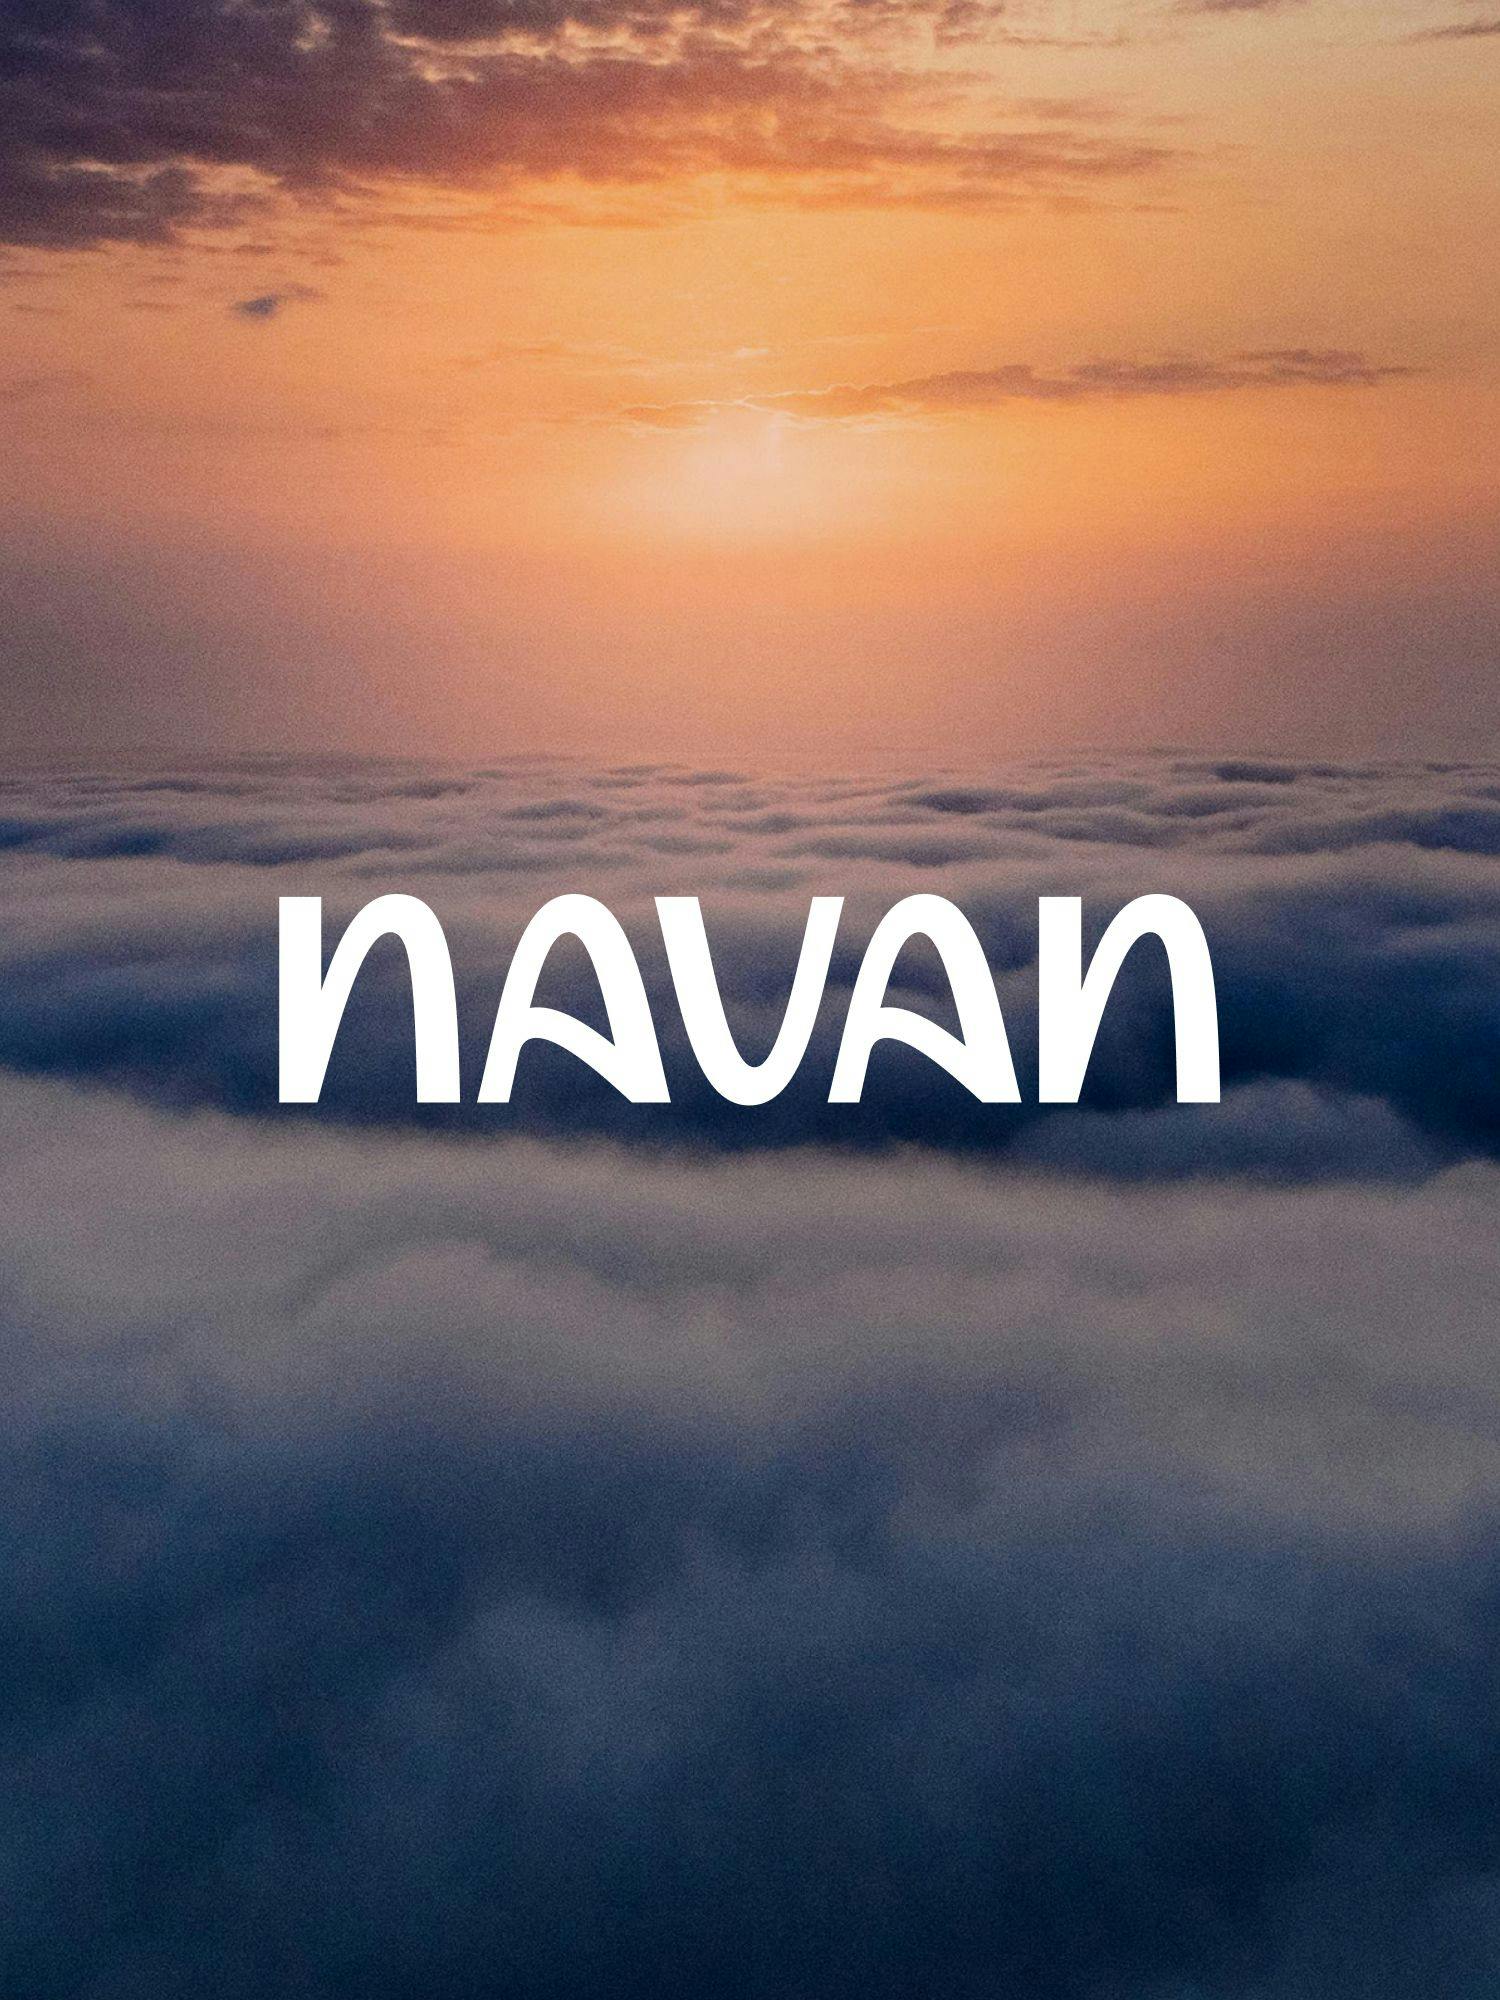 An image of the sky with the Navan logo on top